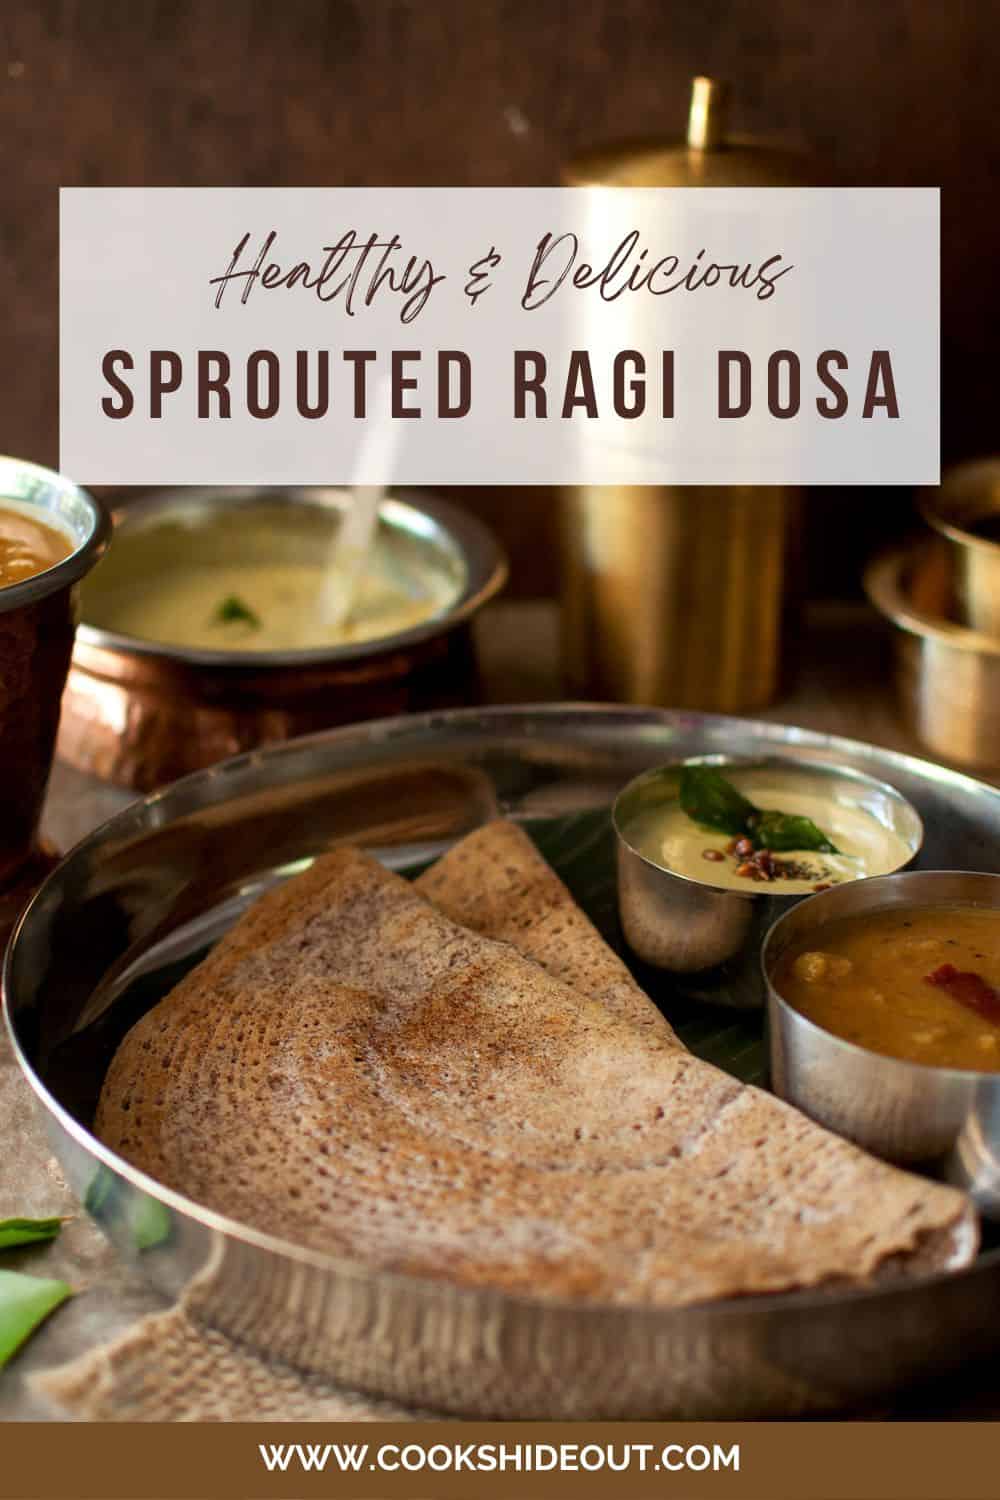 Steel plate with sprouted ragi dosa.